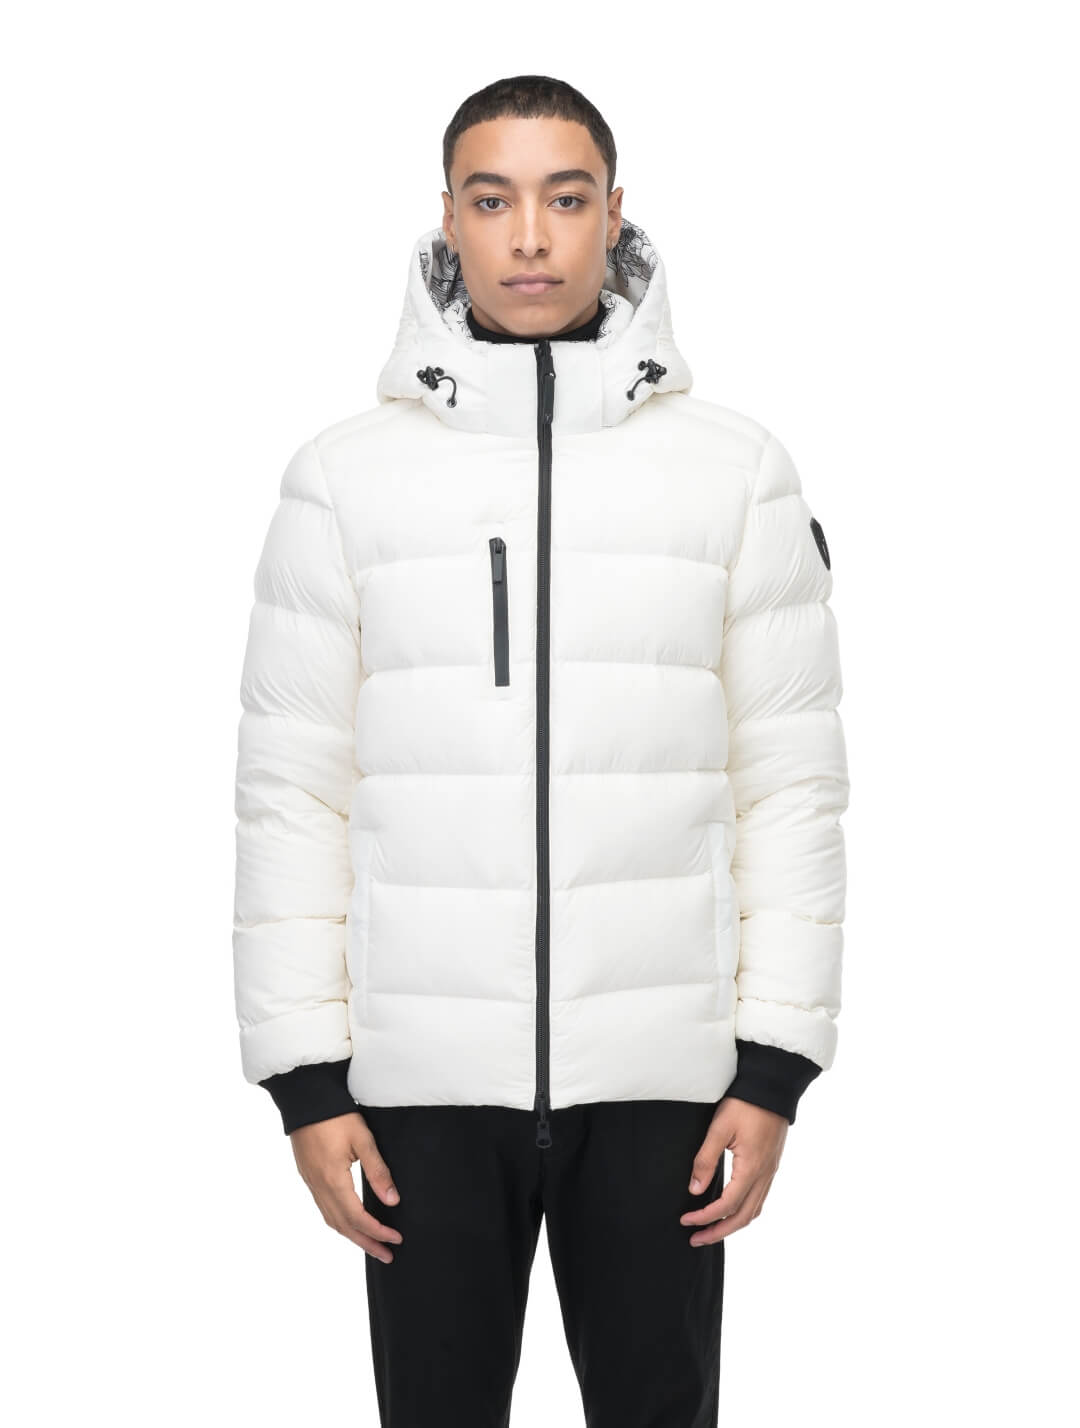 Hip length, reversible men's down filled jacket with removable hood in White Floral Print